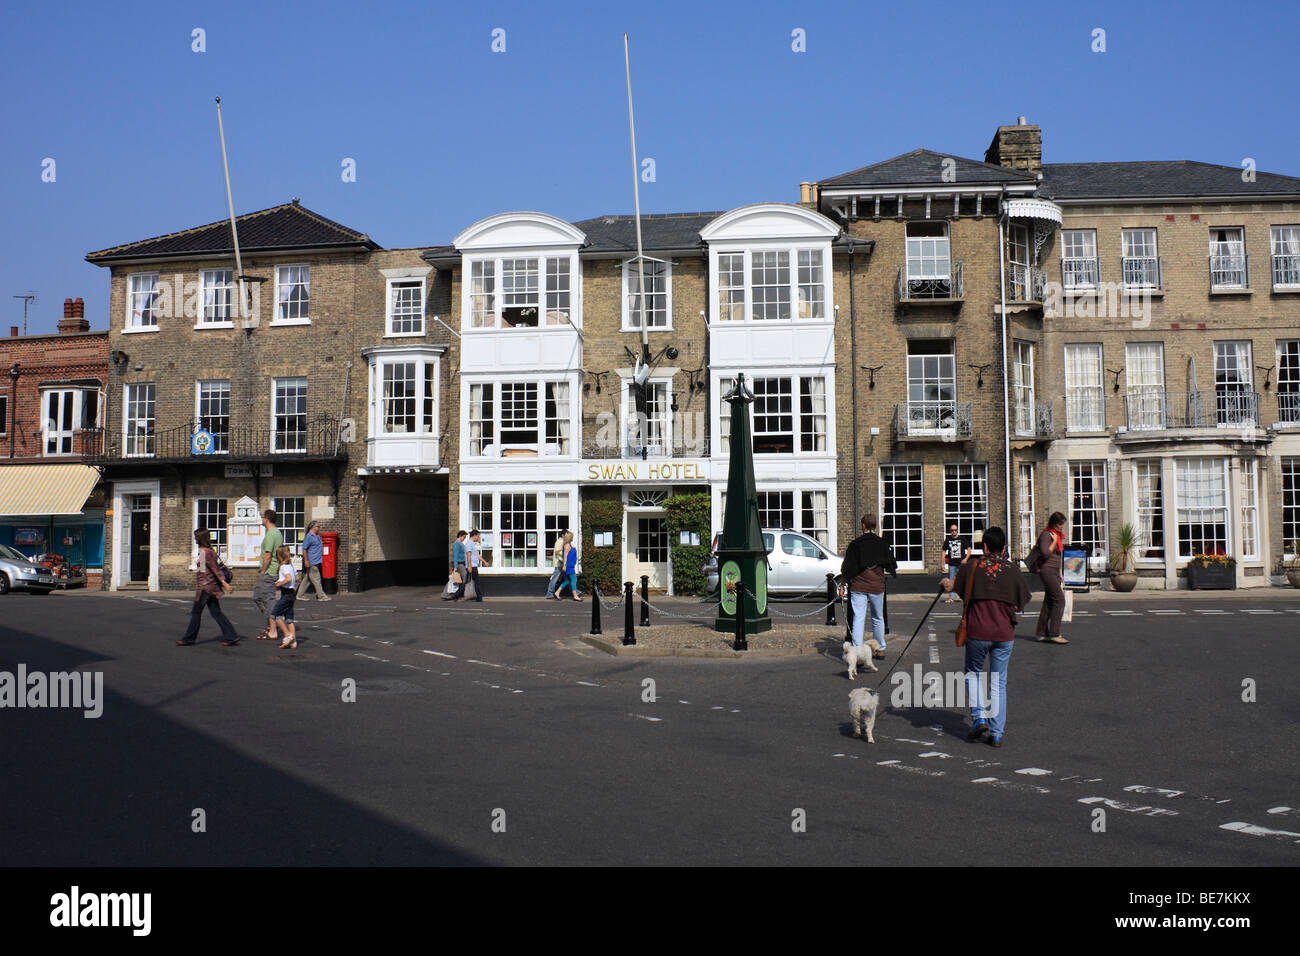 The Swan Hotel and Town Hall in the Market Place, Southwold, Suffolk, England, UK. Stock Photo